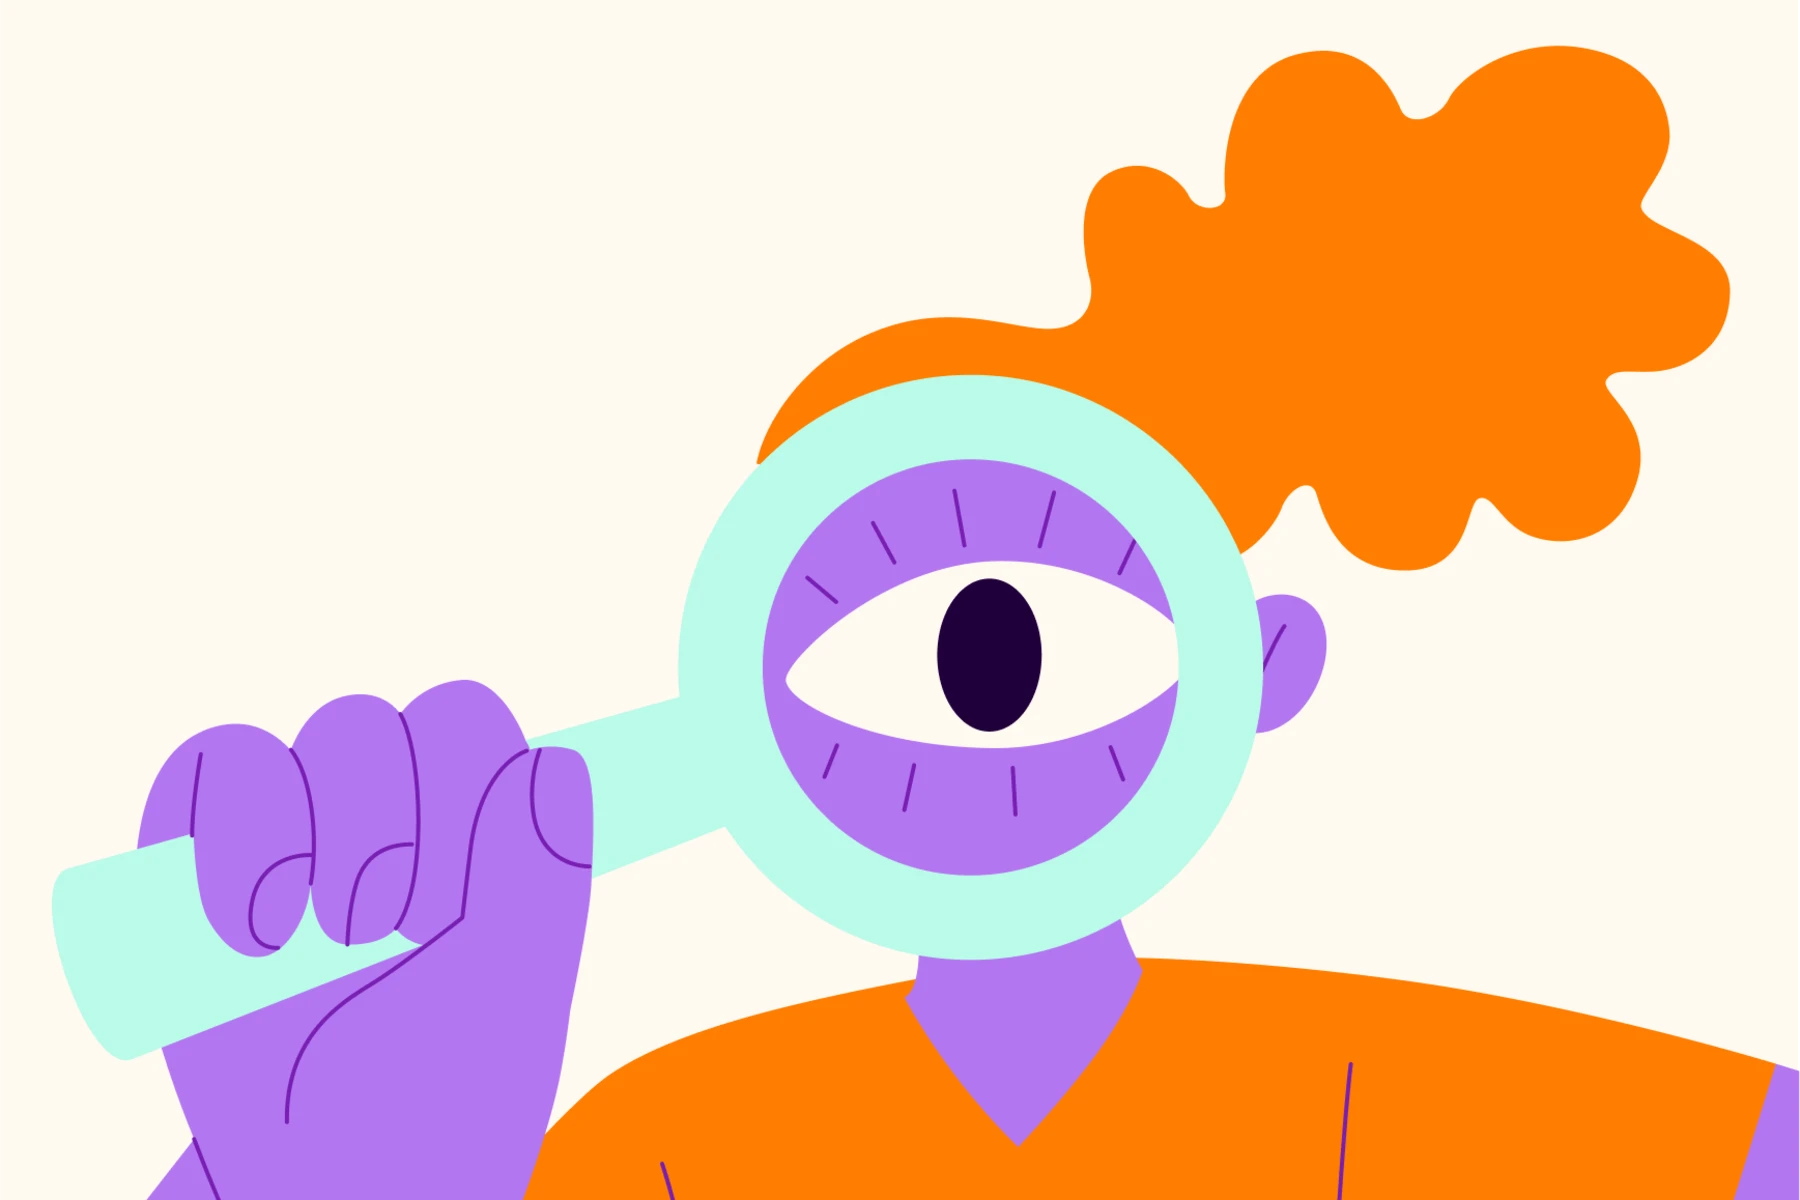 An illustration of a person with big orange hair looking through a magnifying glass, showing a large eye to depict the process of searching for candidates